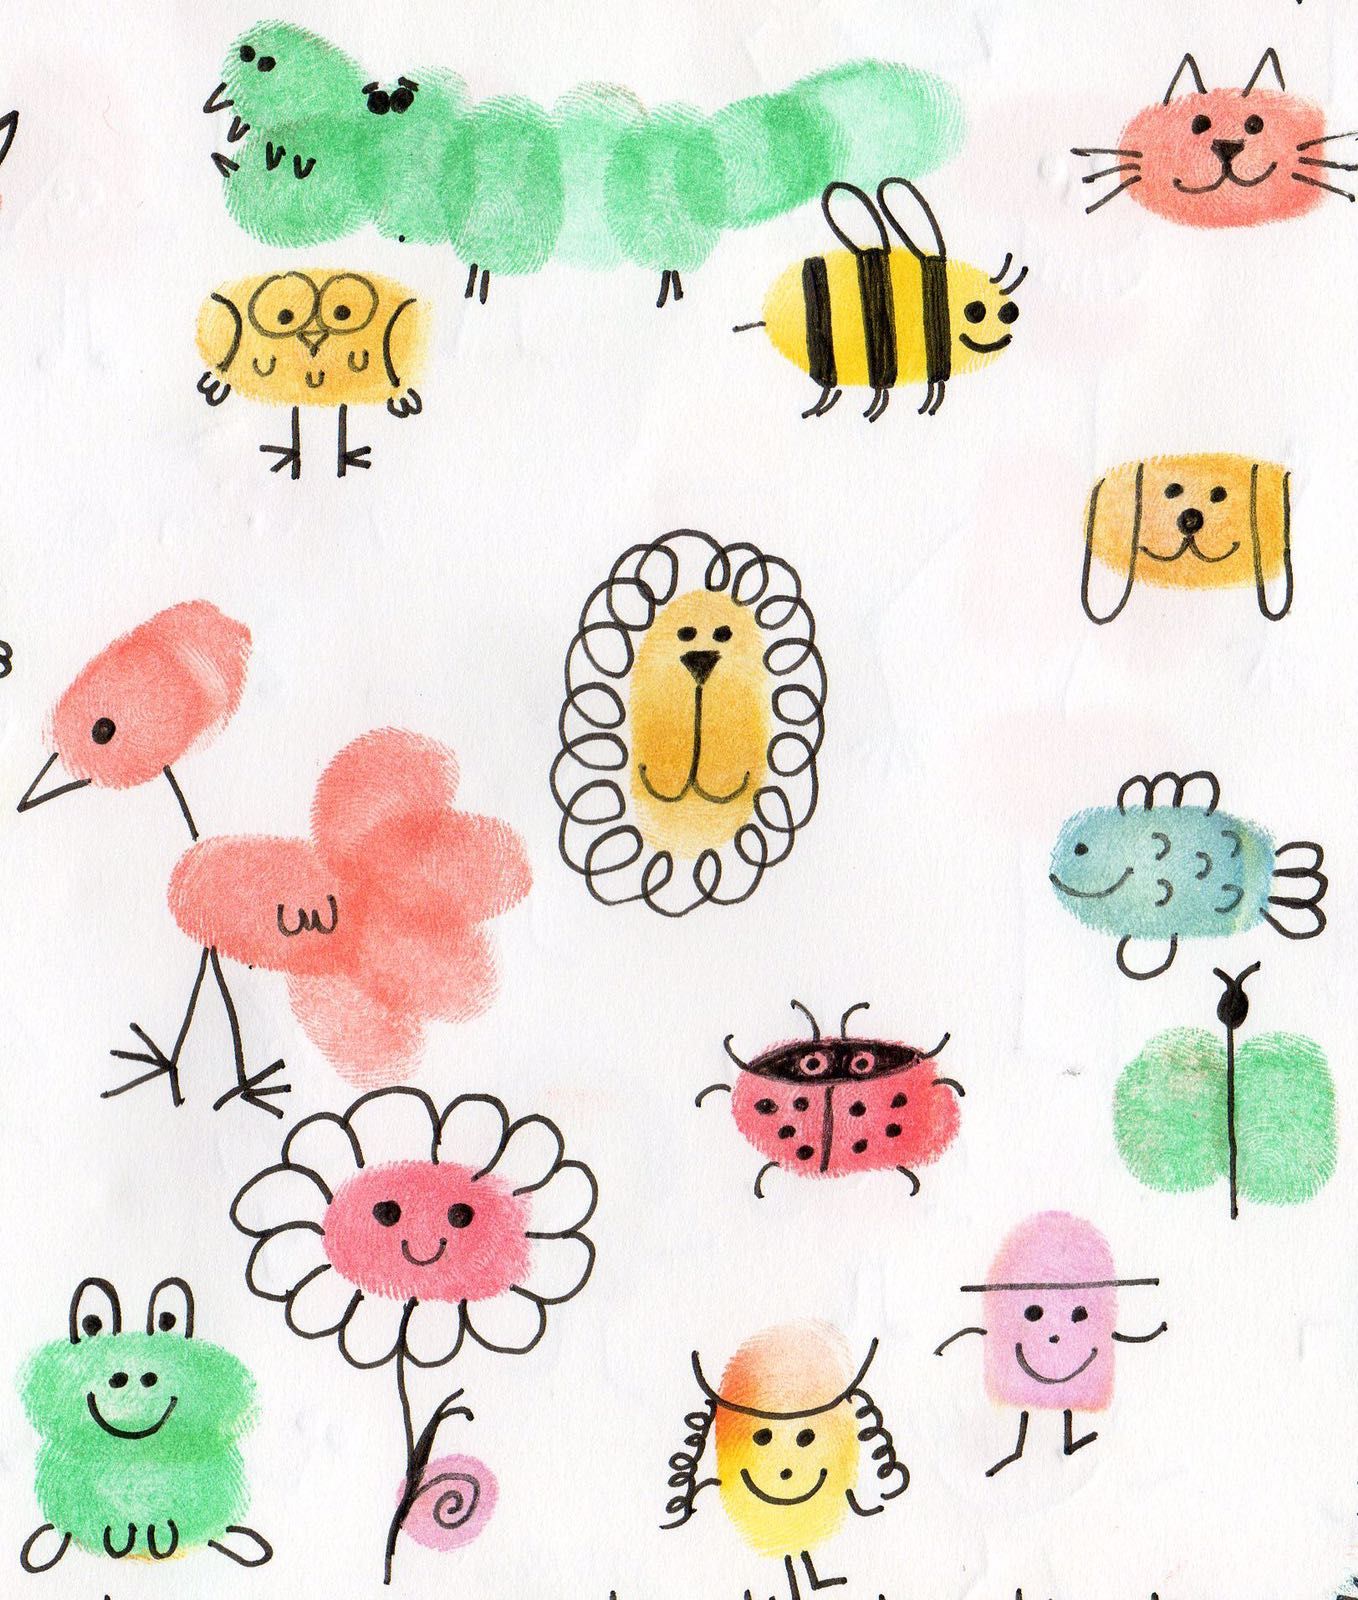 Arts and Crafts ” Fingerprints animals” – Friday, 8th May – English is fun  in Stefie's Class